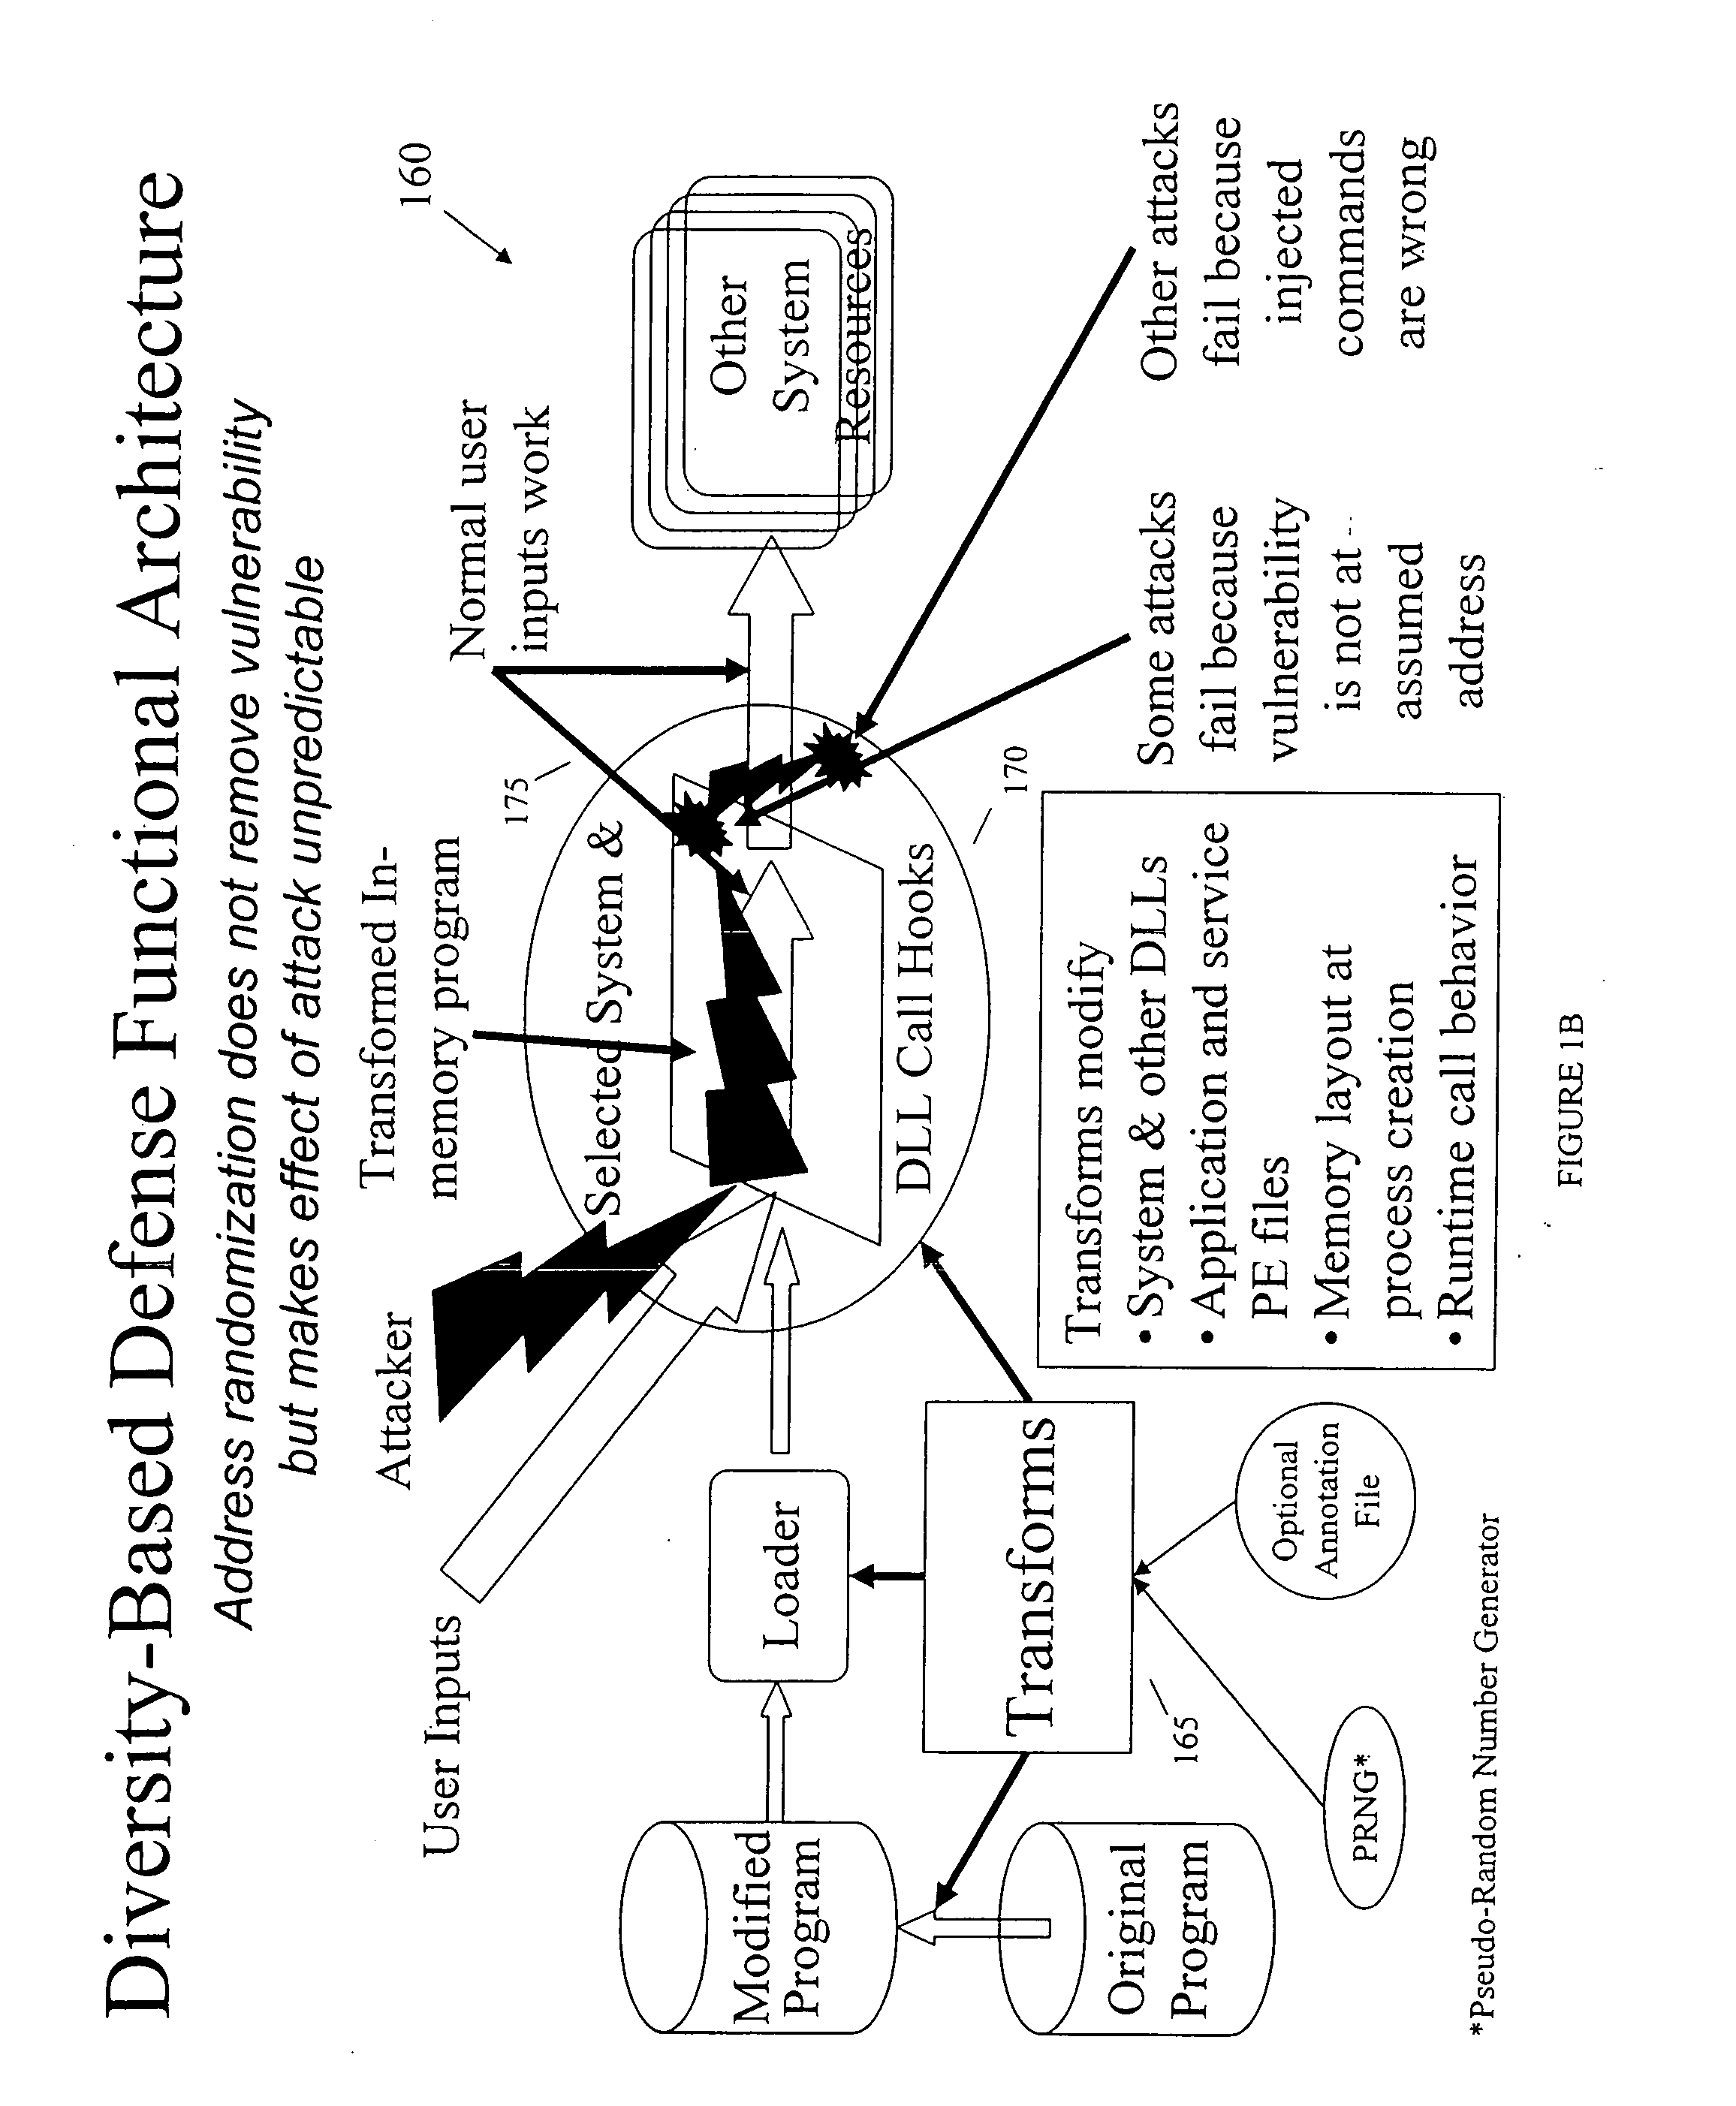 Diversity-based security system and method